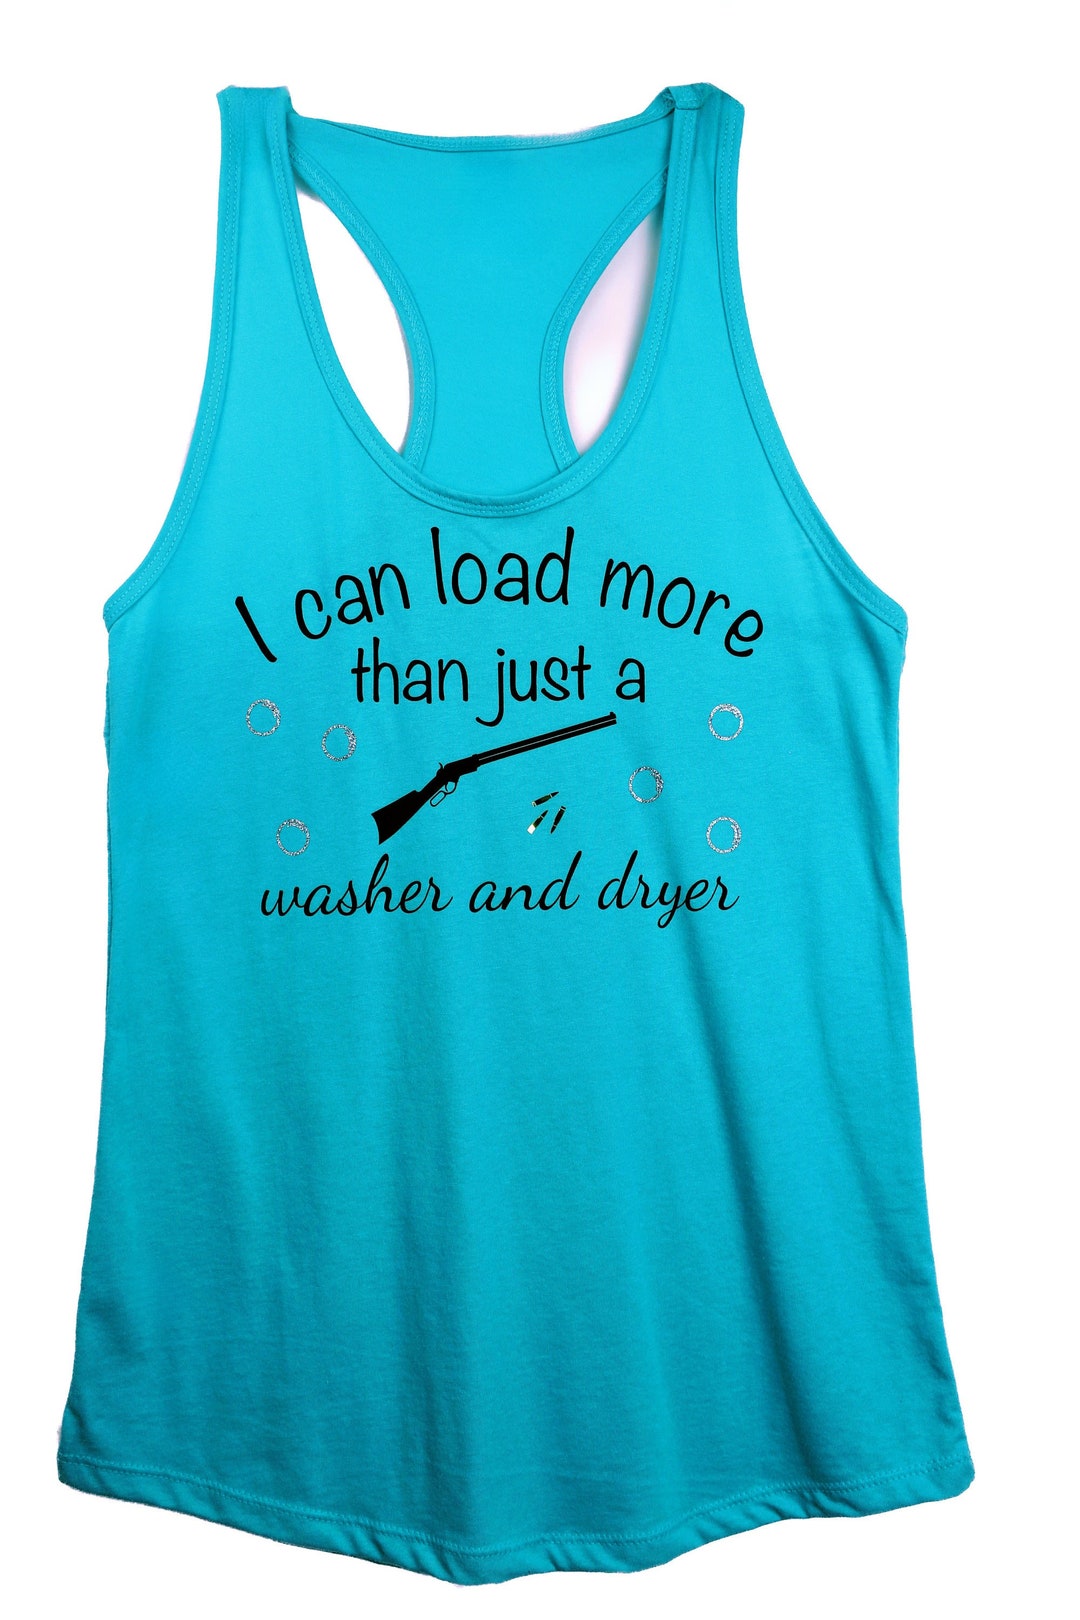 I Can Load More Than Just a Washer and Dryer Tank Top - Etsy